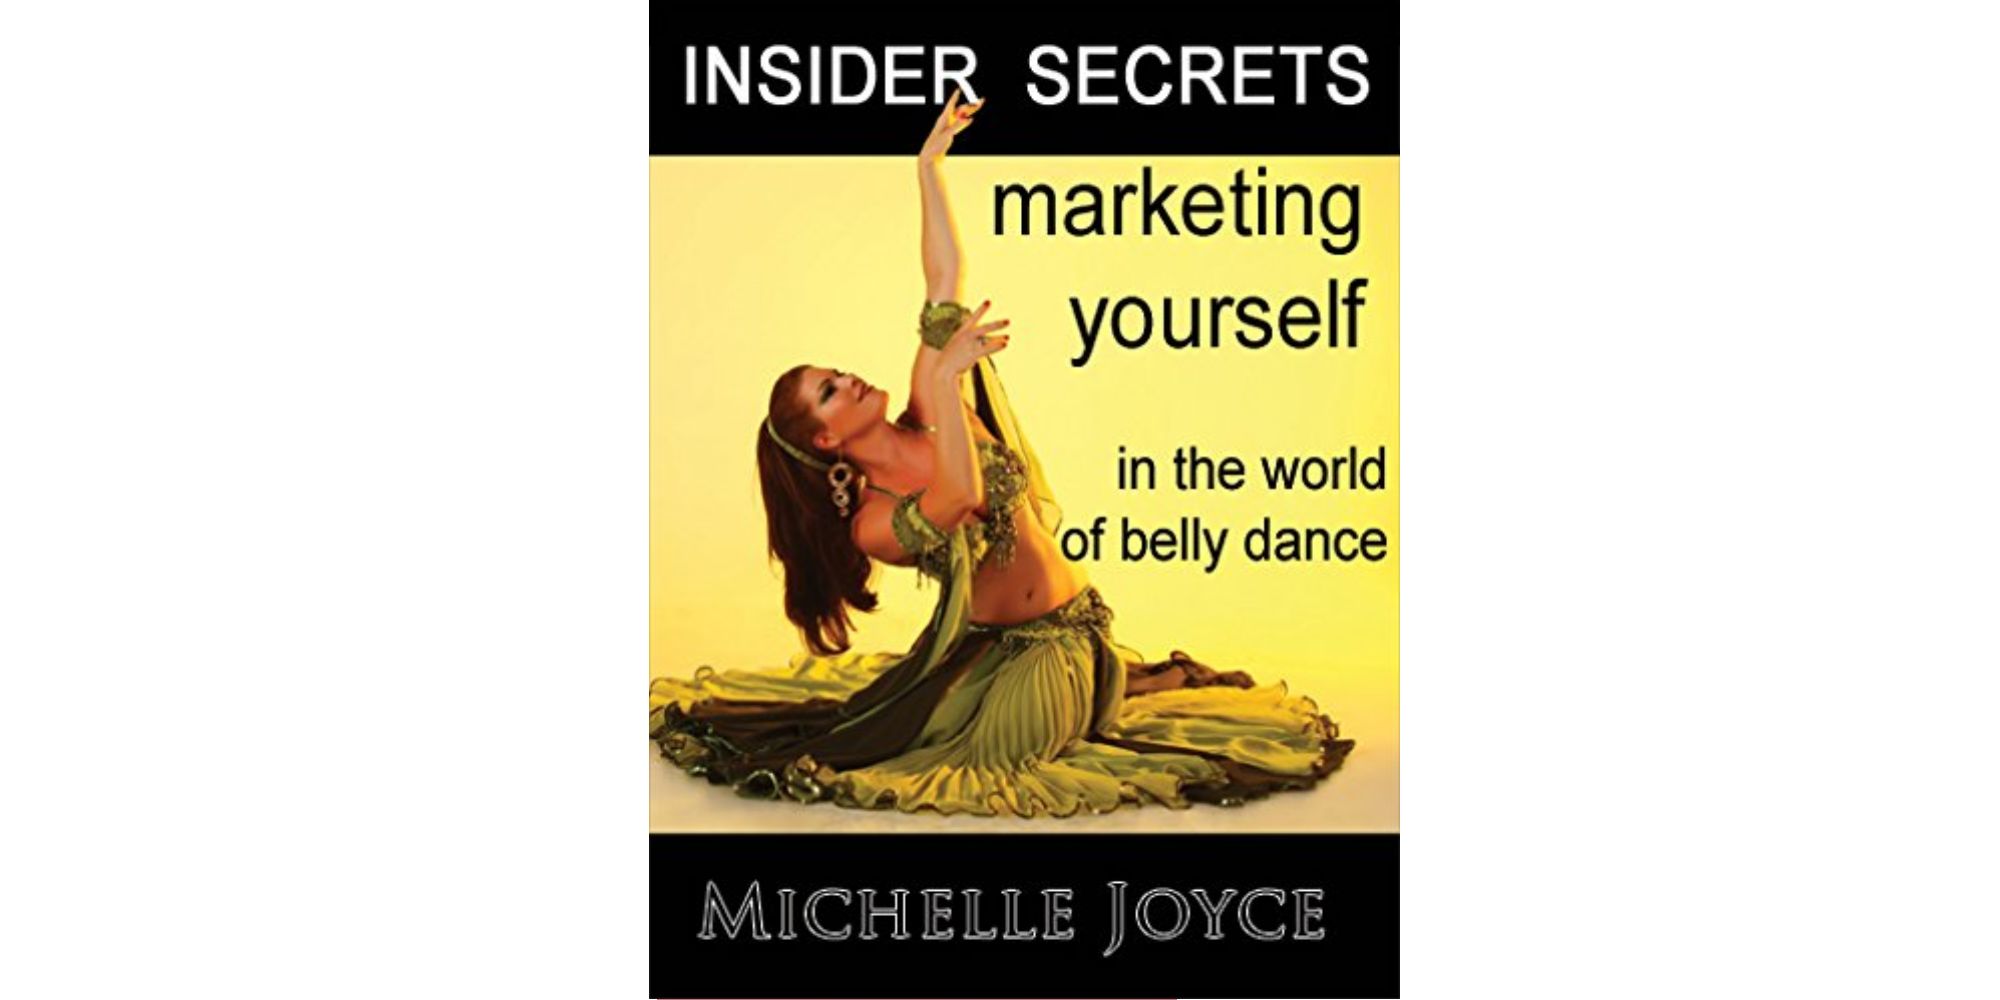 insider-secrets-marketing-yourself-in-the-world-of-belly-dance-cover